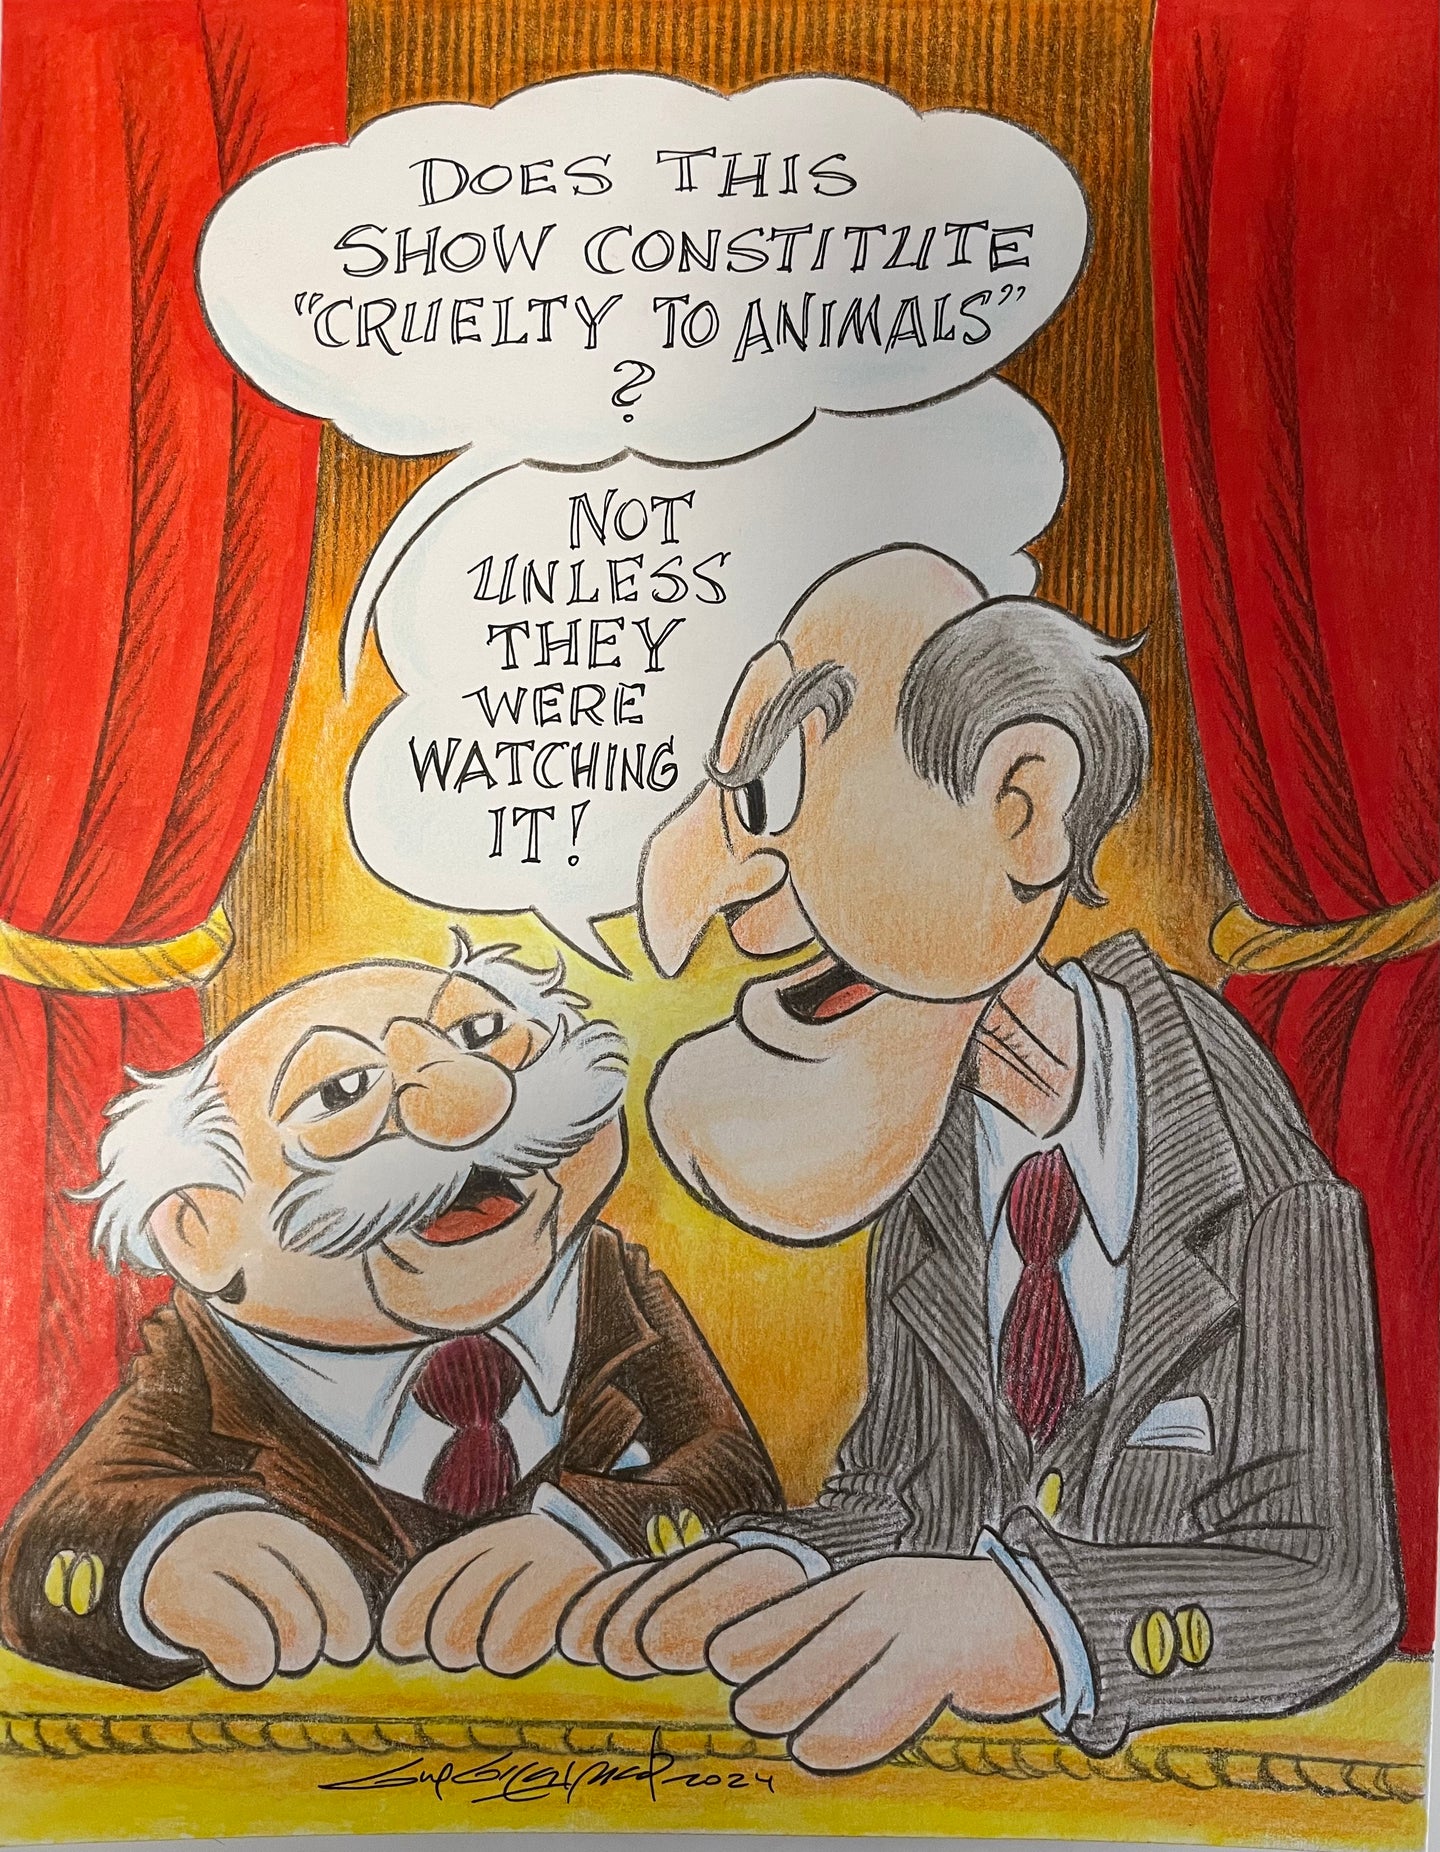 Statler and Waldorf Full Color Original Art 8.5x11 Sketch  - Created by Guy Gilchrist